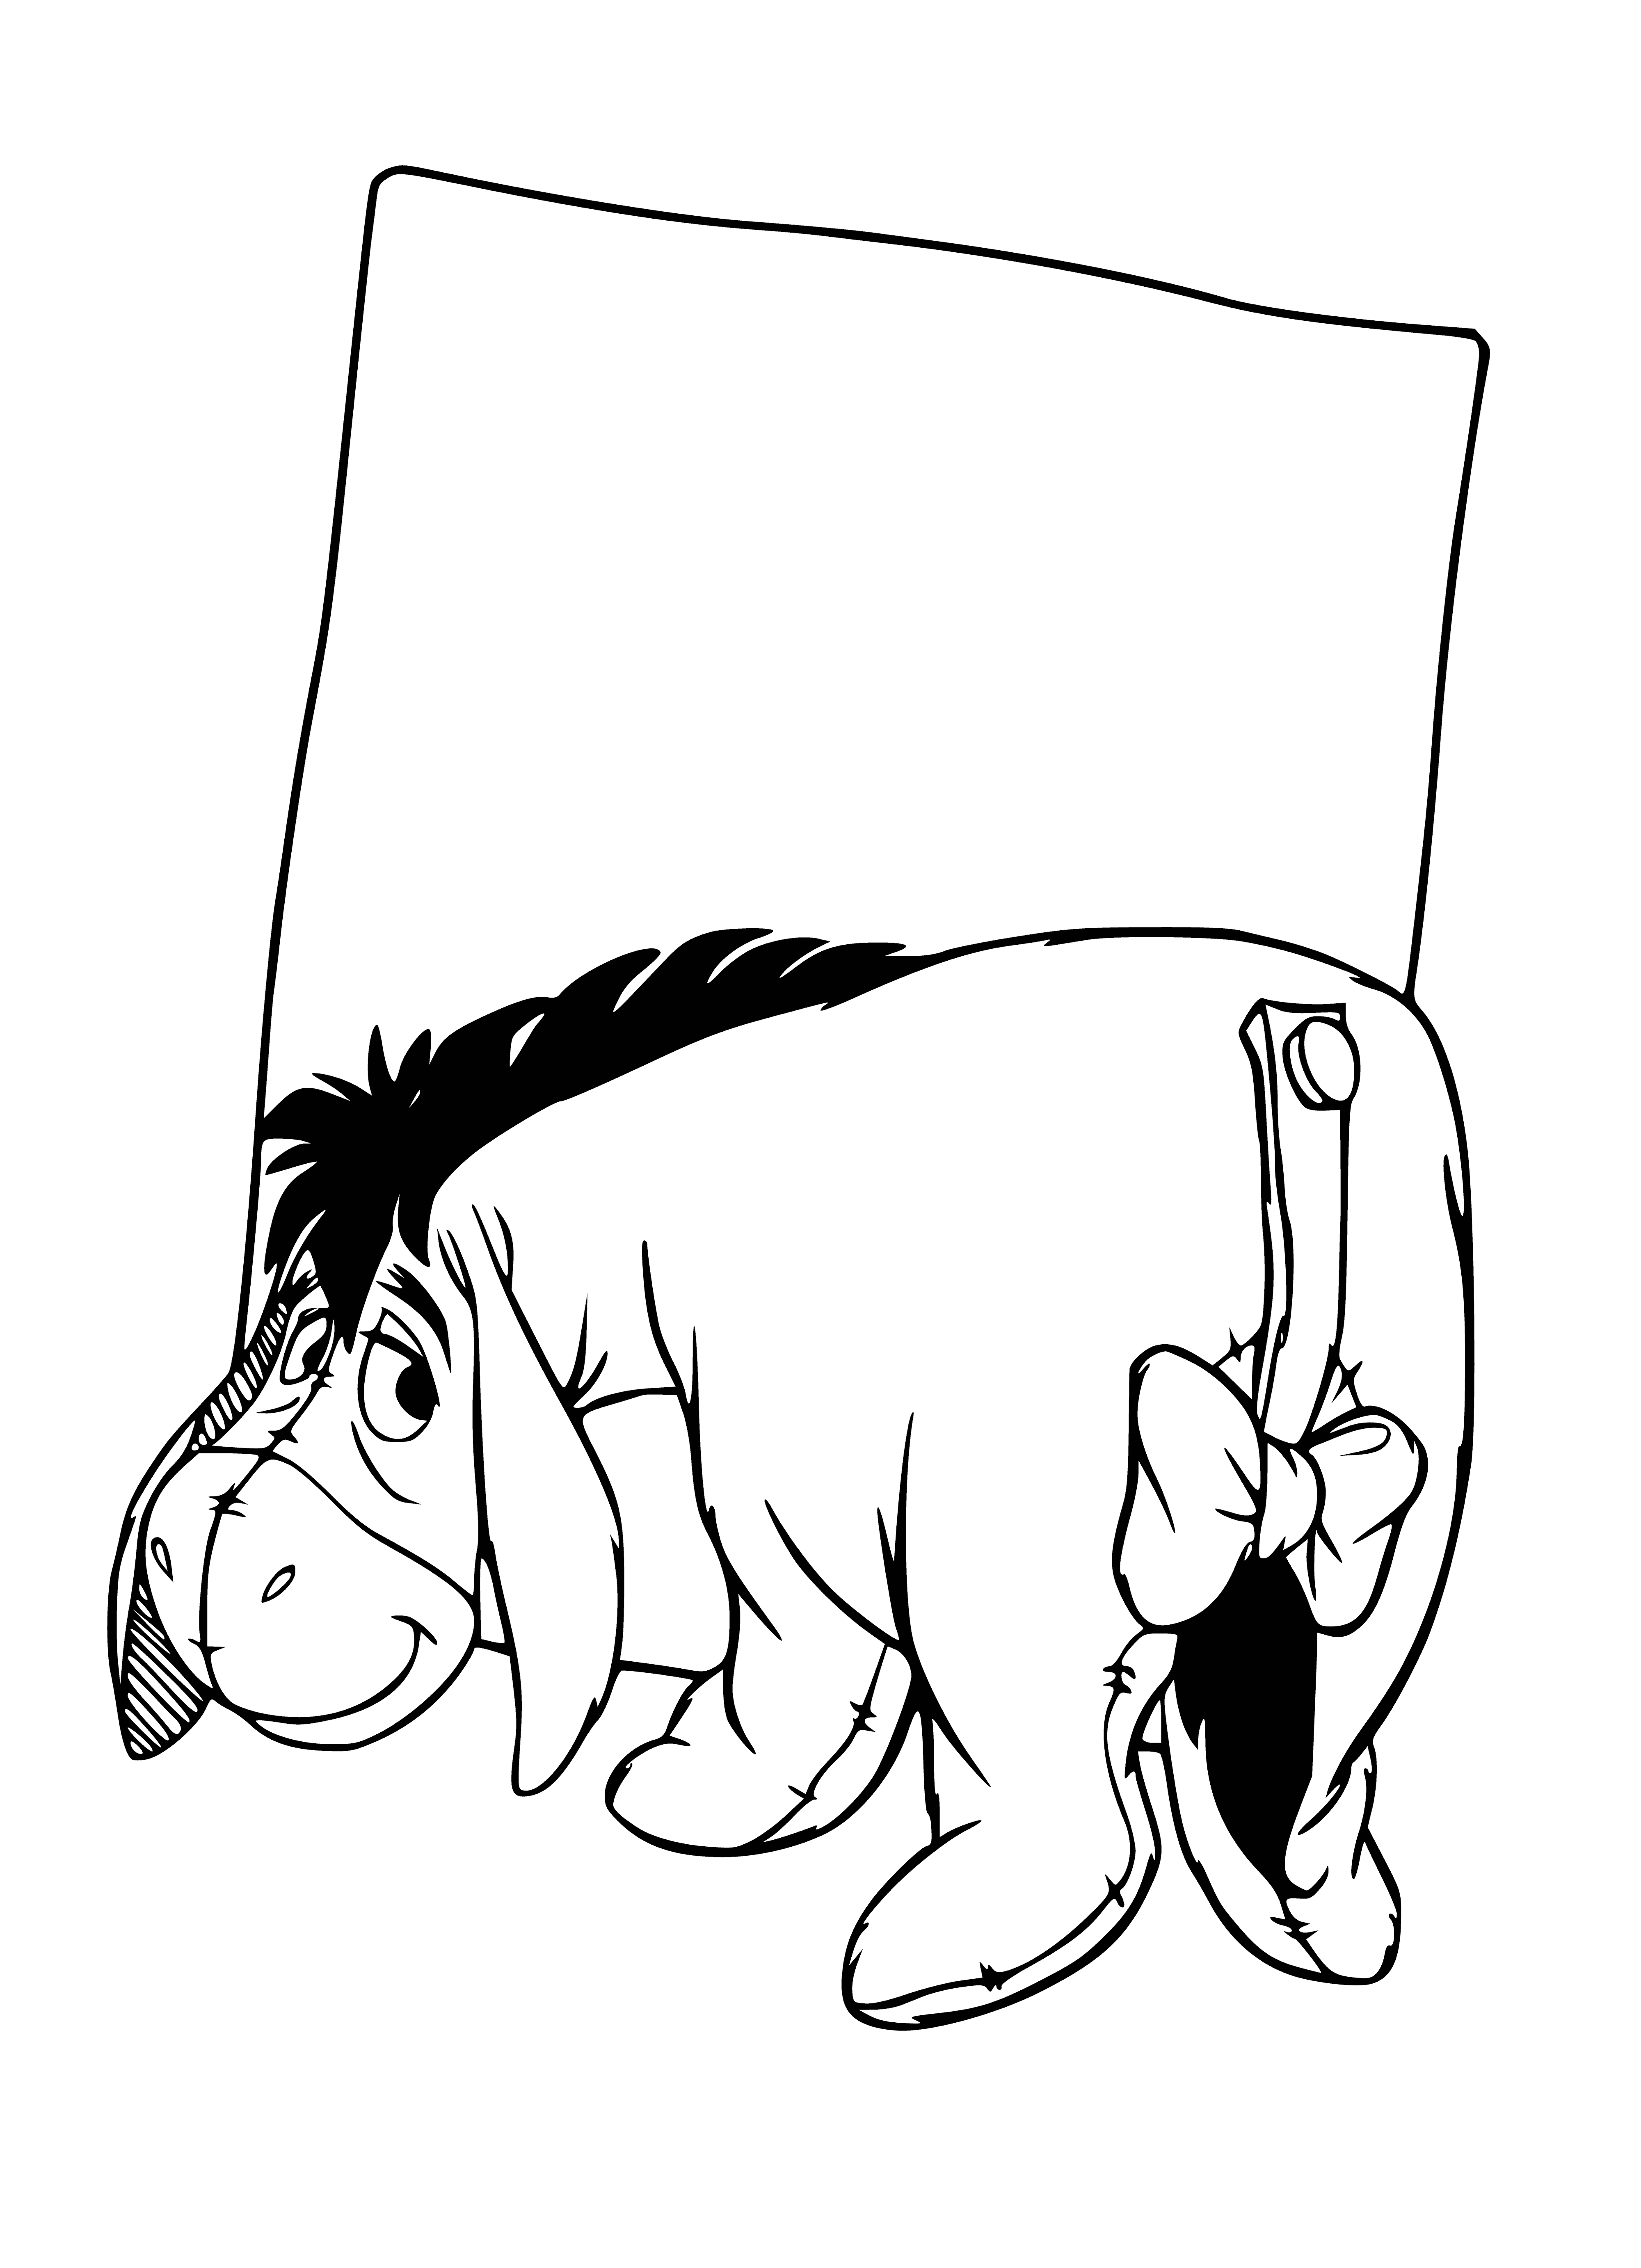 coloring page: Beige rabbit wearing red/white shirt, blue pants sits with legs crossed, in front of big blue/white striped box.